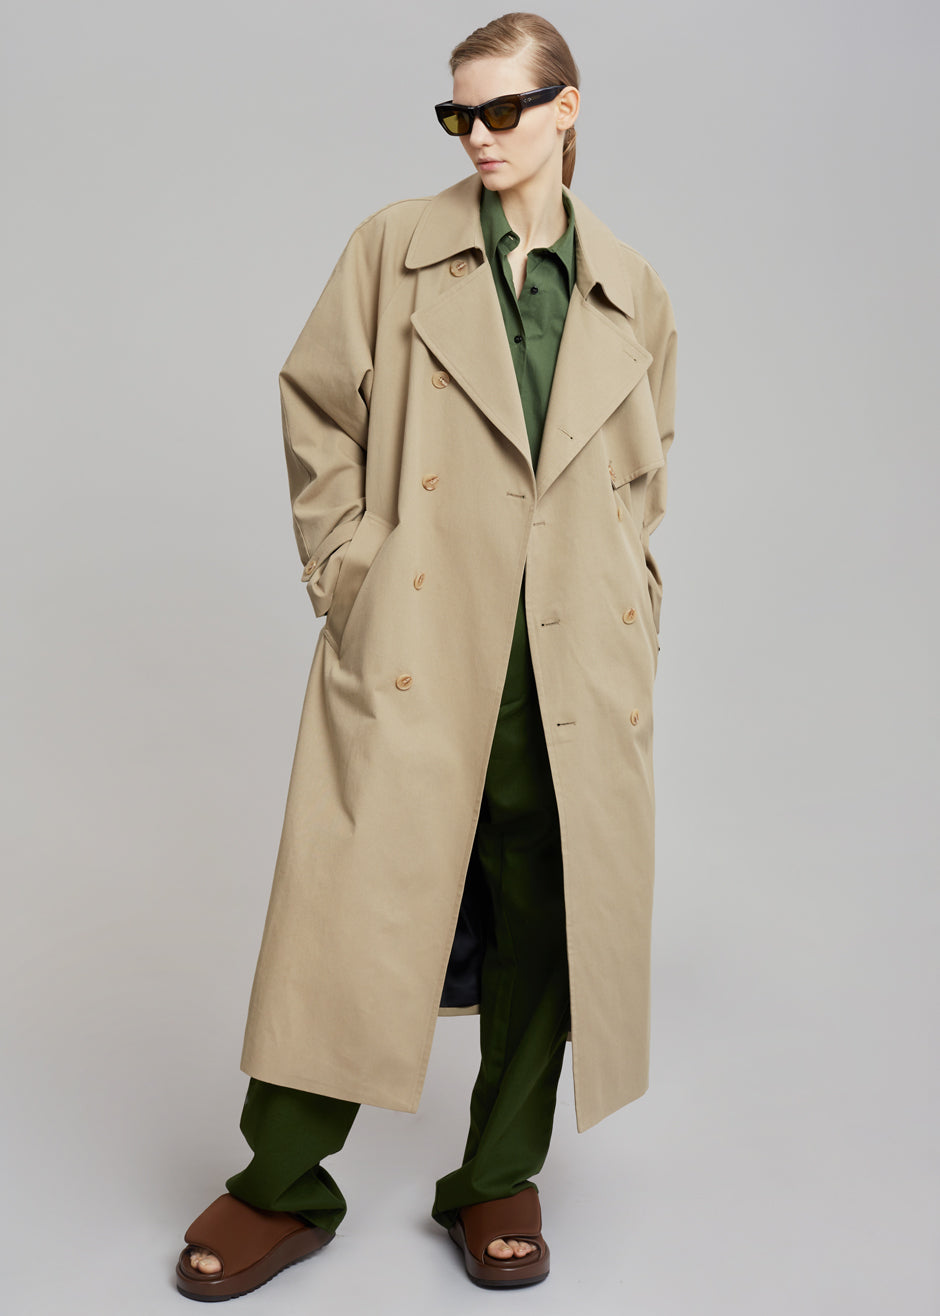 Umi Belted Trench Coat - Beige - 10